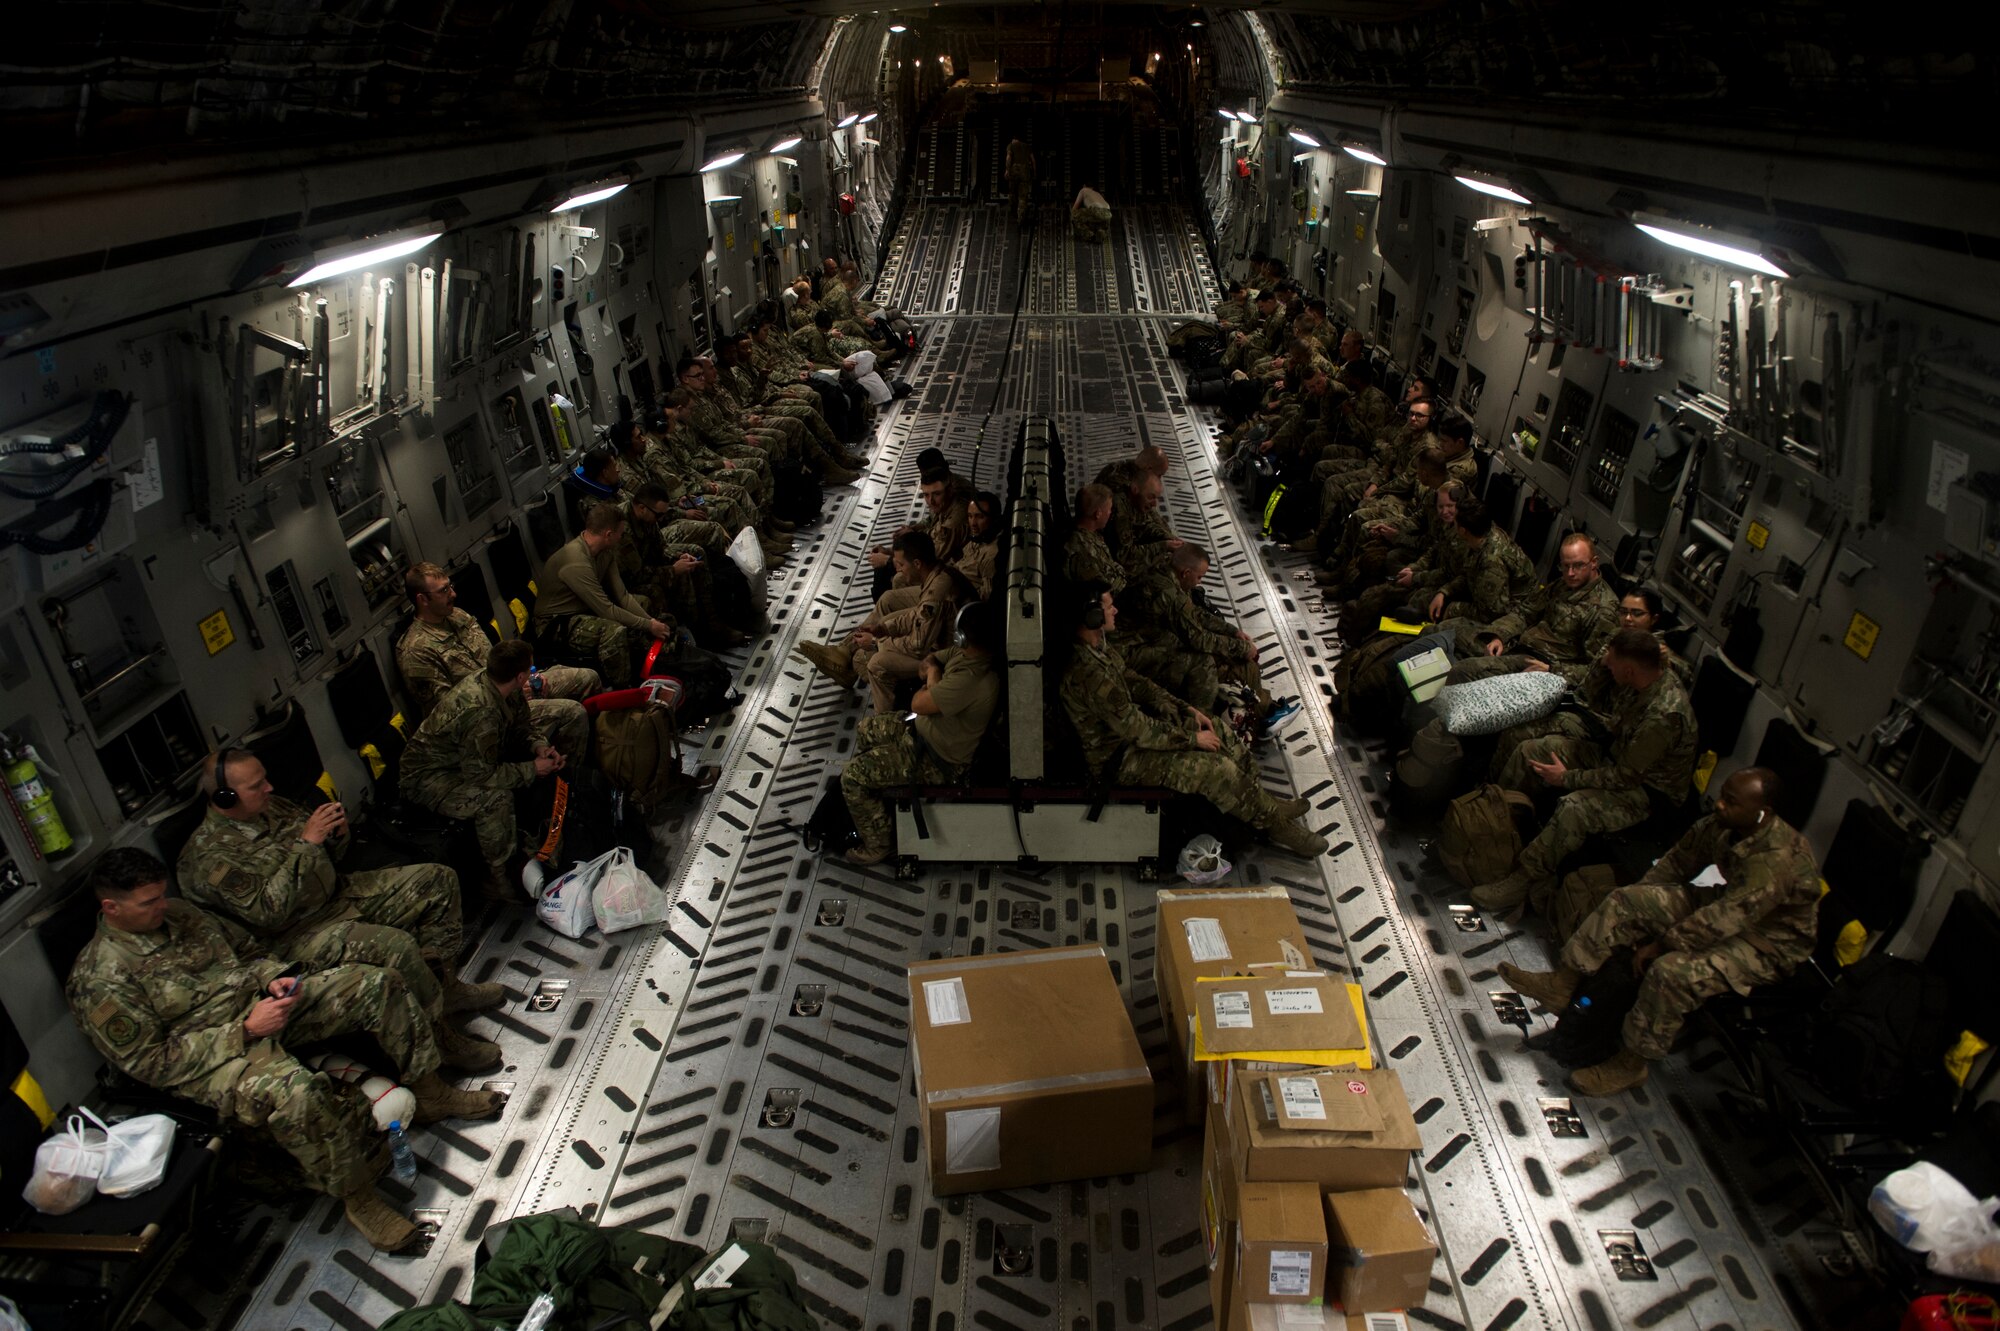 U.S. Air Force Airmen and aircrew wait for cargo to be loaded aboard a C-17 Globemaster III assigned to the 816th Expeditionary Airlift Squadron at Al Udeid Air Base, Qatar, Jan. 10, 2020.